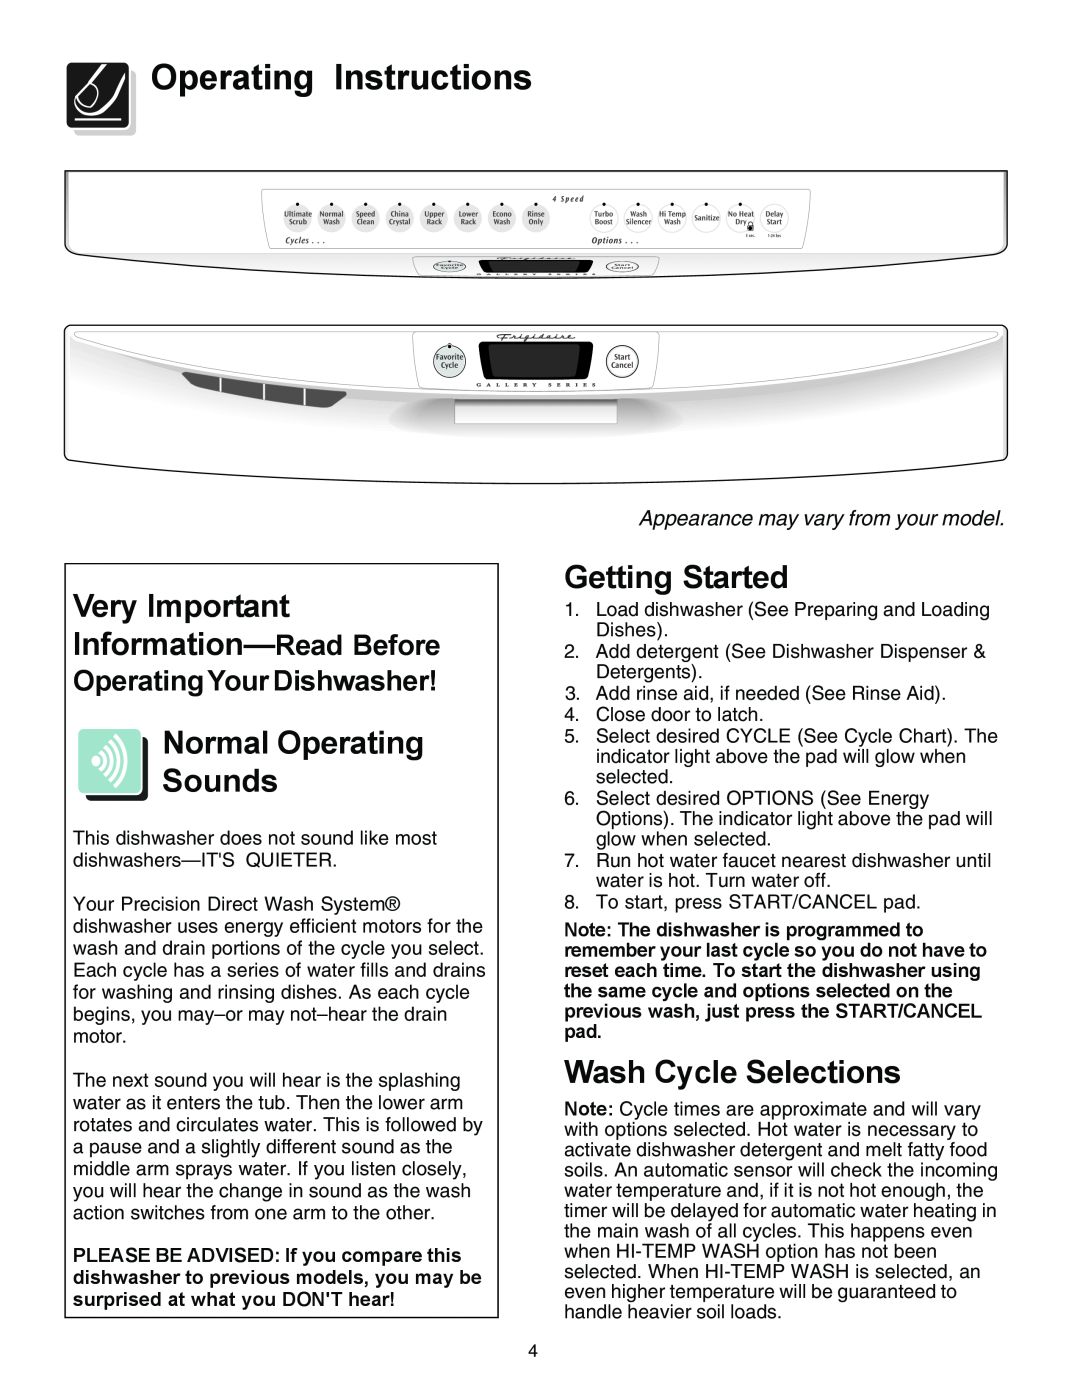 Frigidaire 3000 Operating Instructions, Very Important Information-Read Before, Normal Operating Sounds, Getting Started 